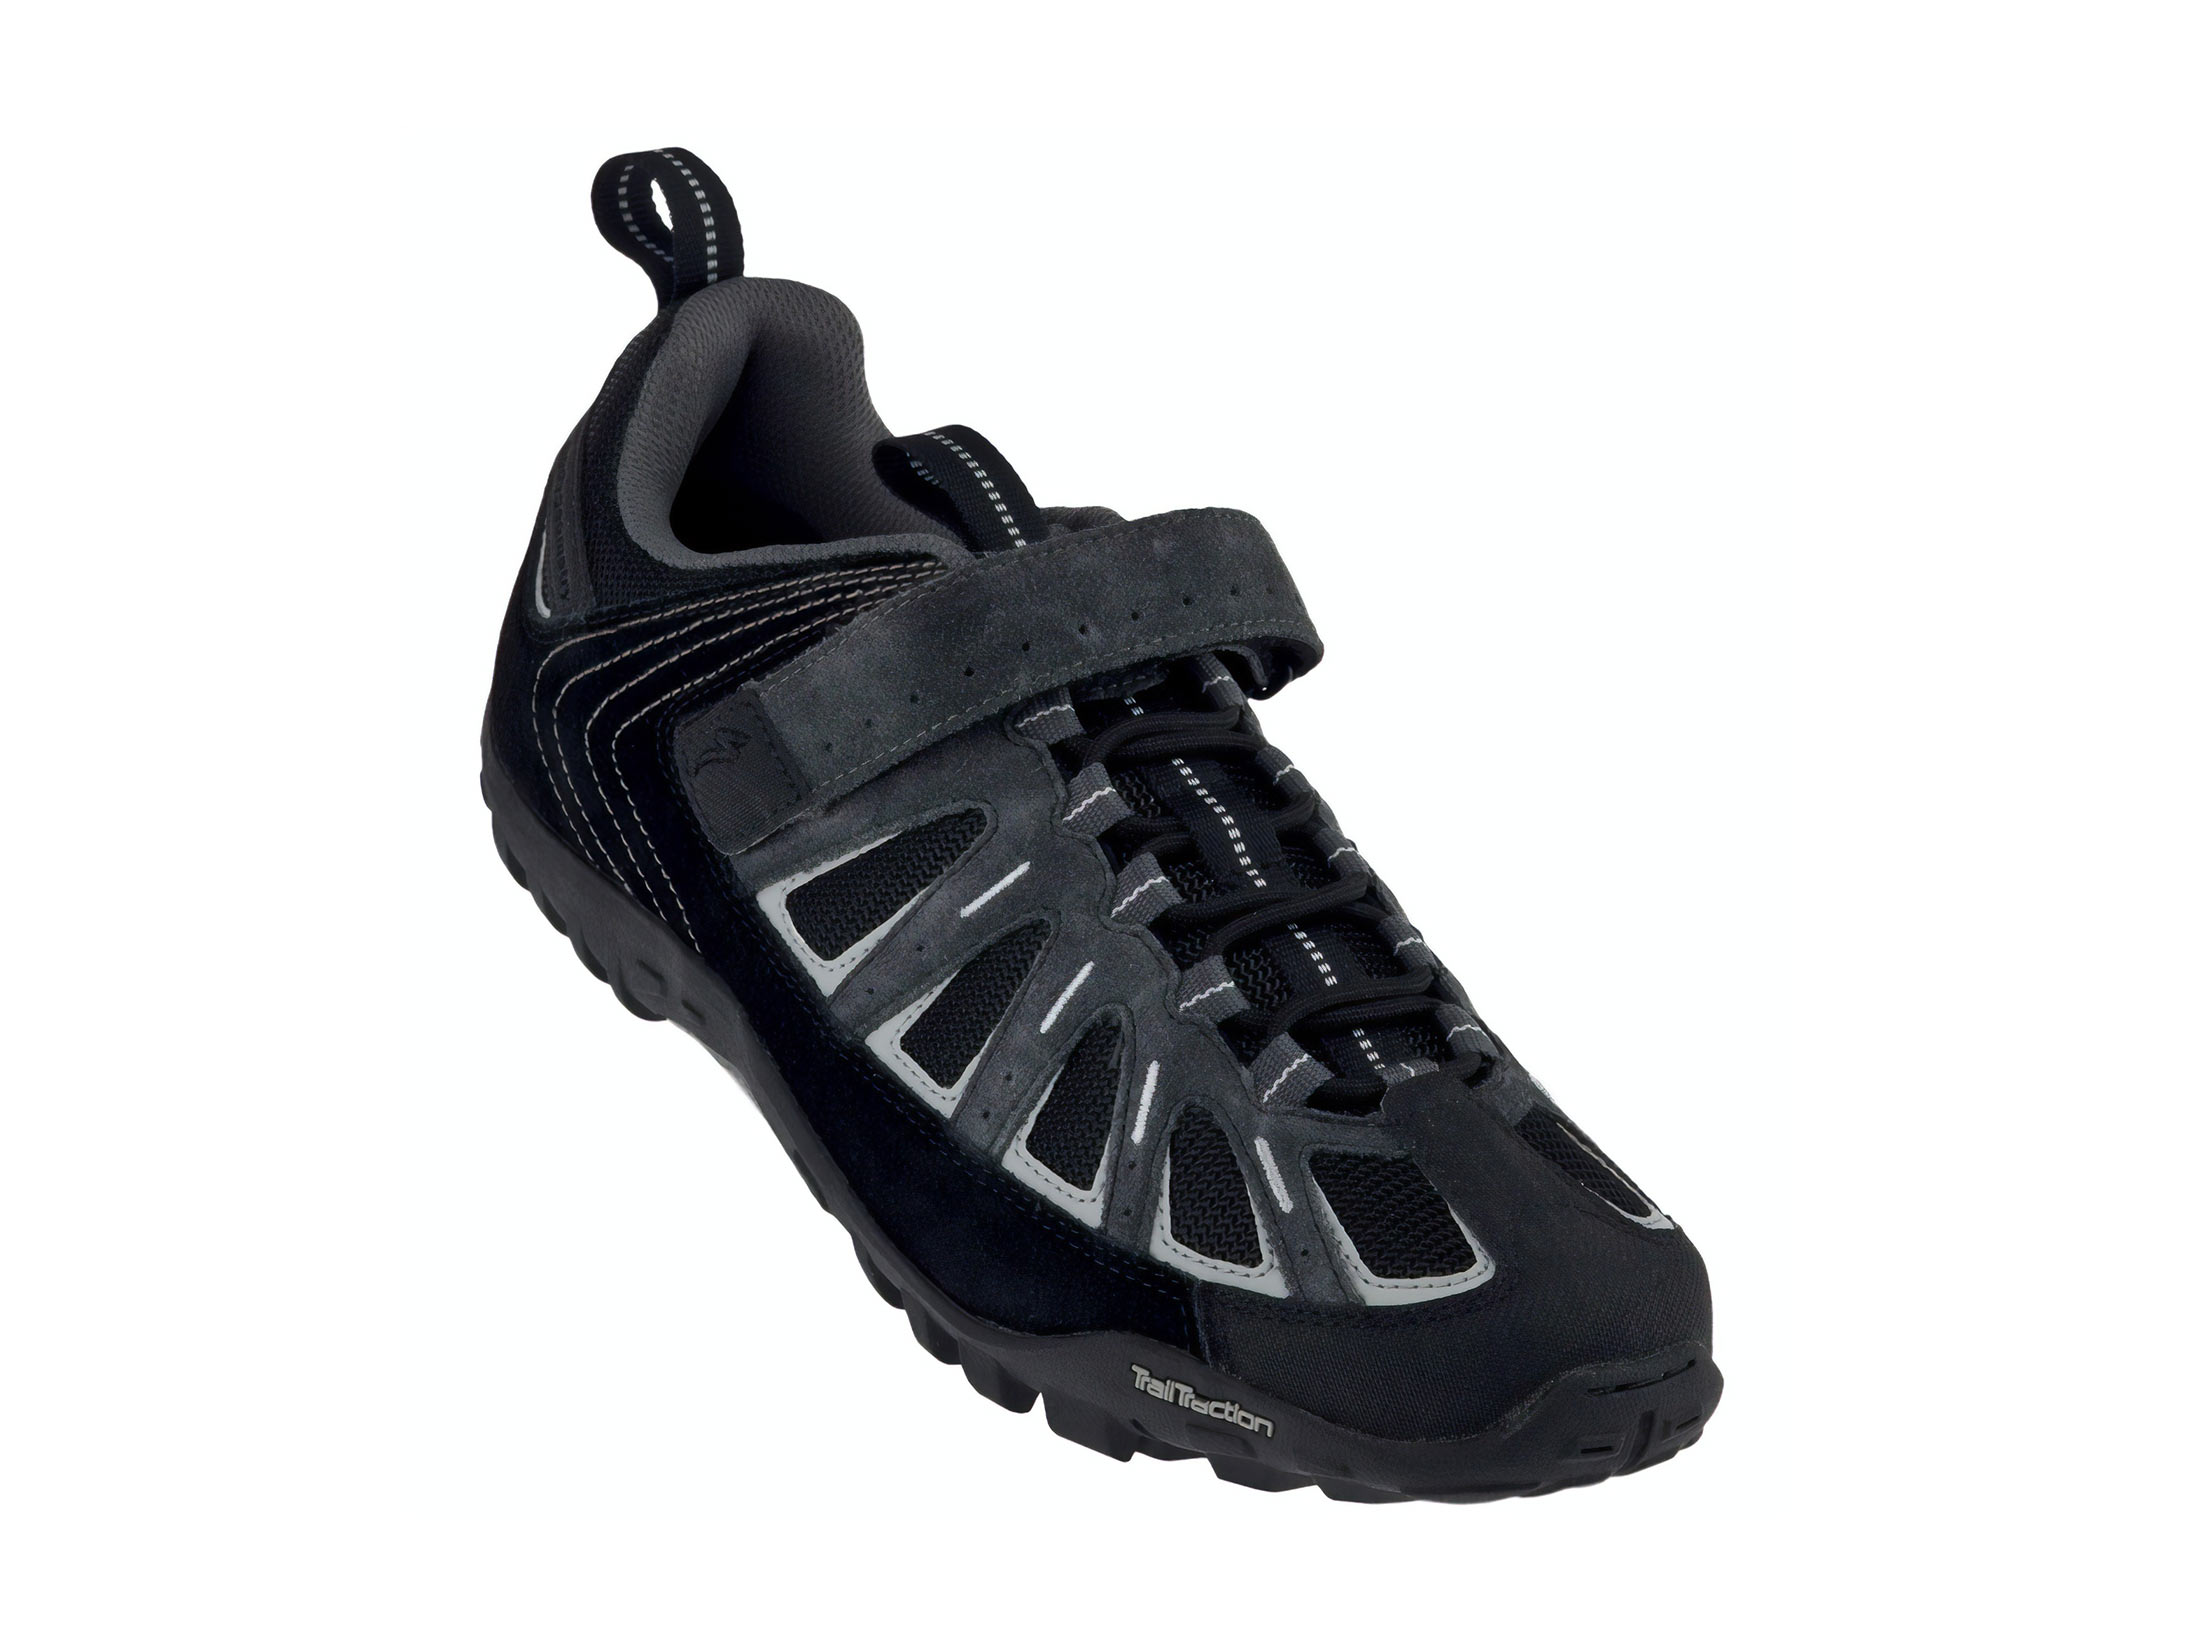 Specialized Tahoe Shoes - Black